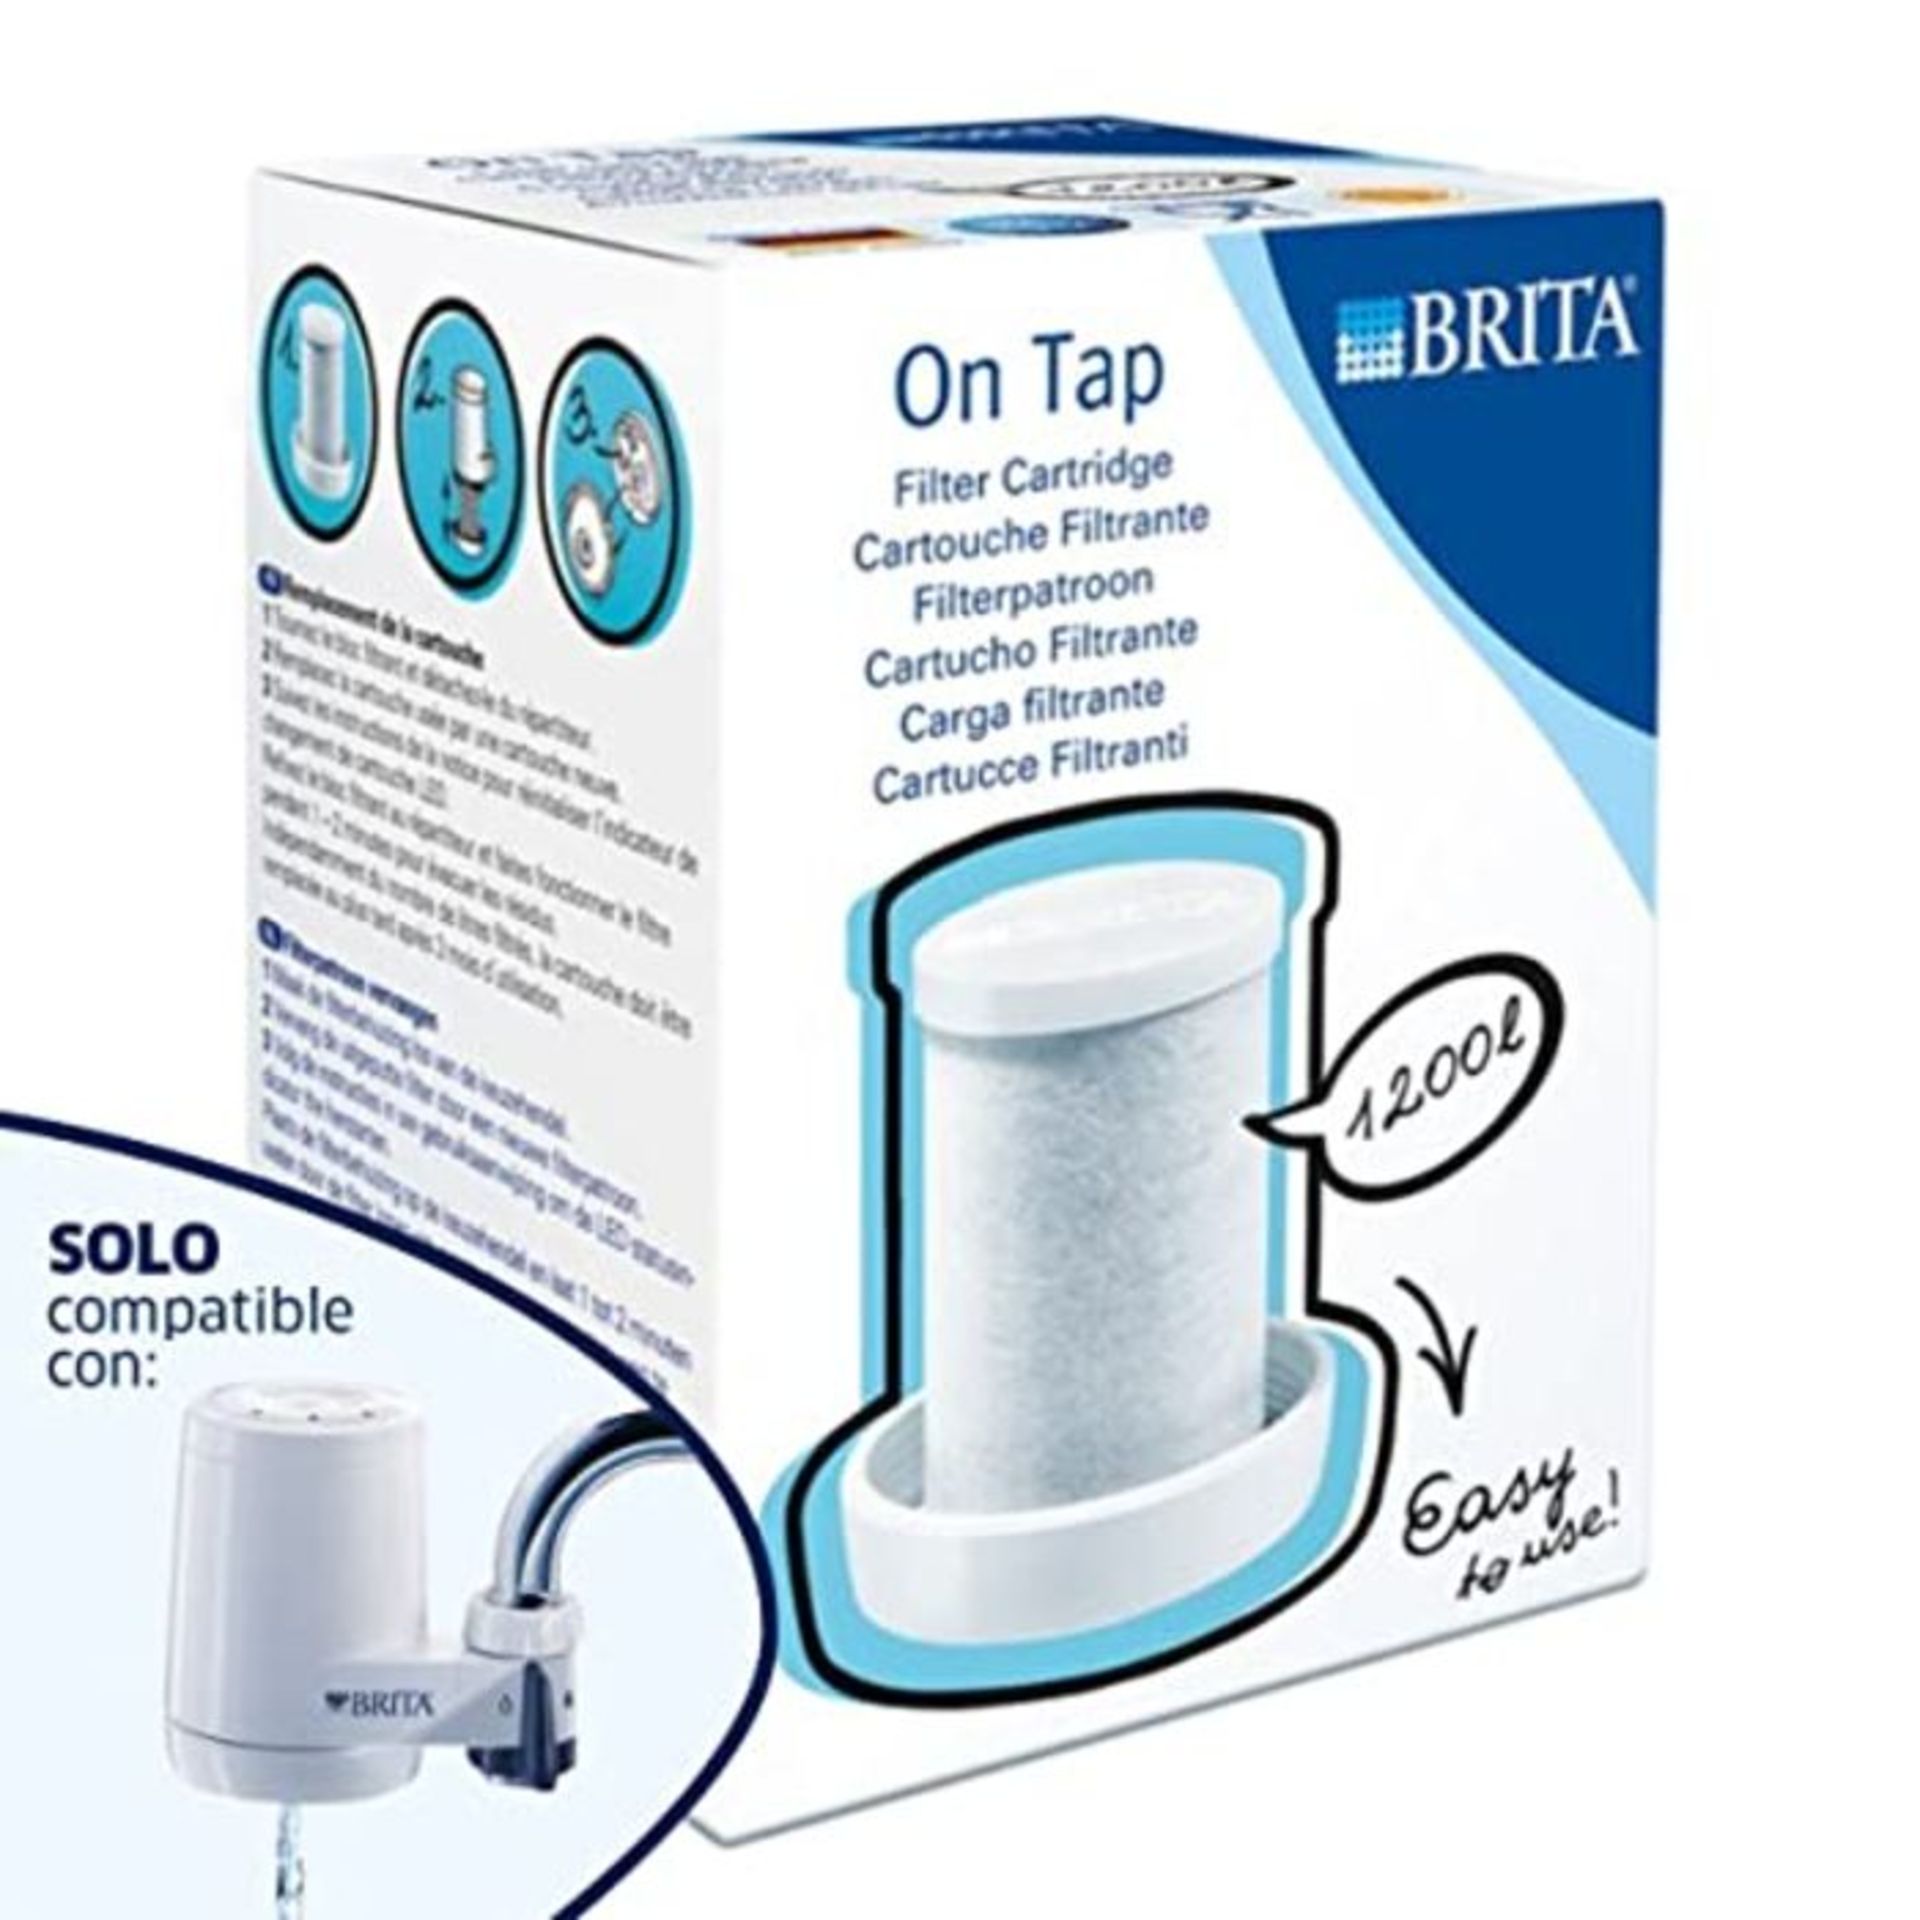 BRITA On Tap - Tap Water Filter with 3-month refills for filtered water - 1 cartridge